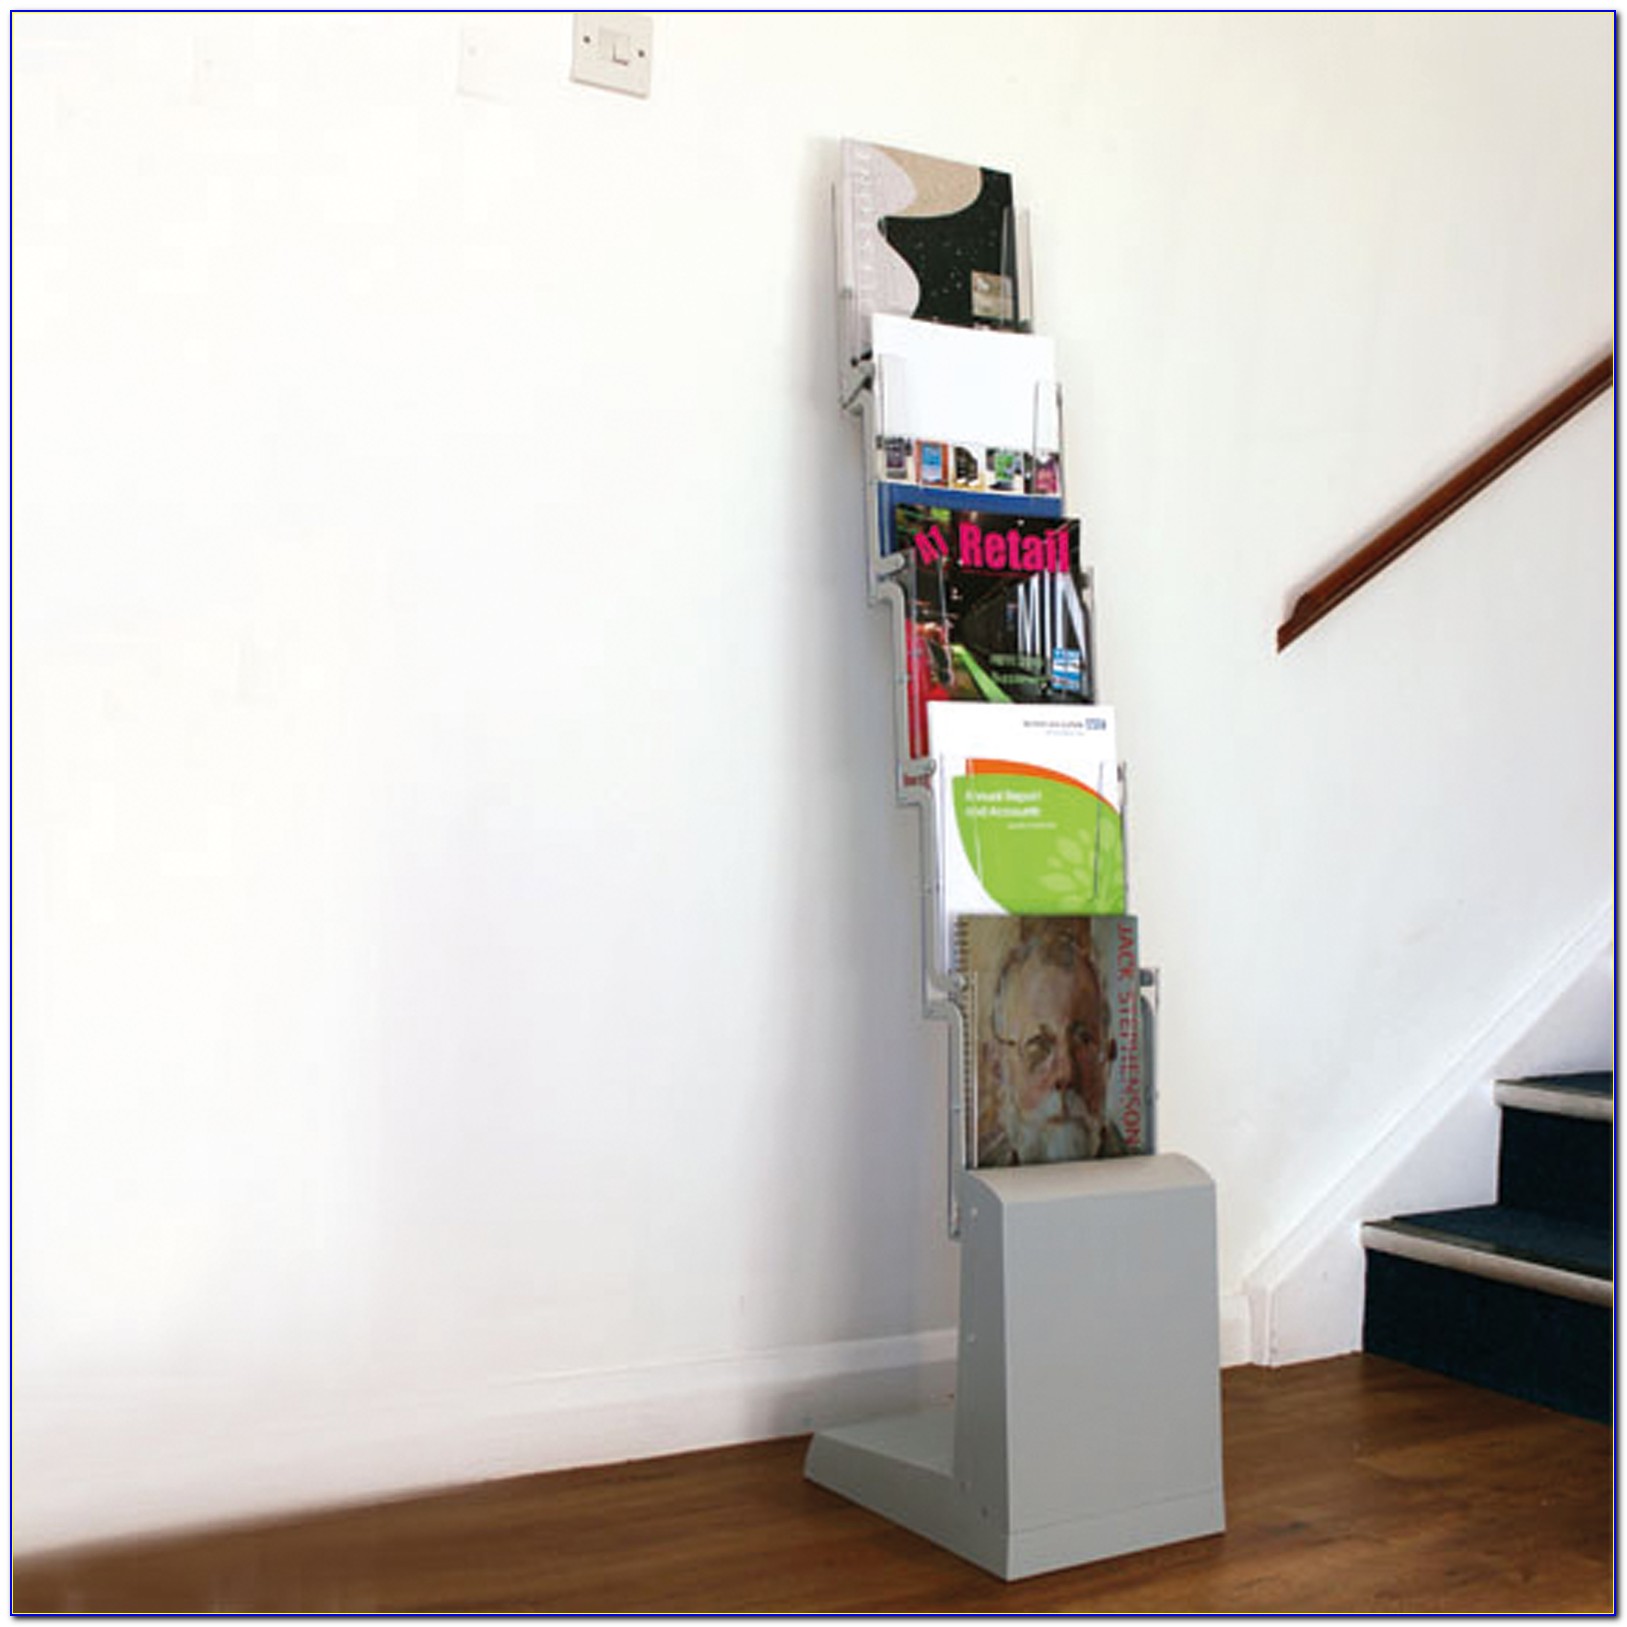 Collapsible Brochure Stand